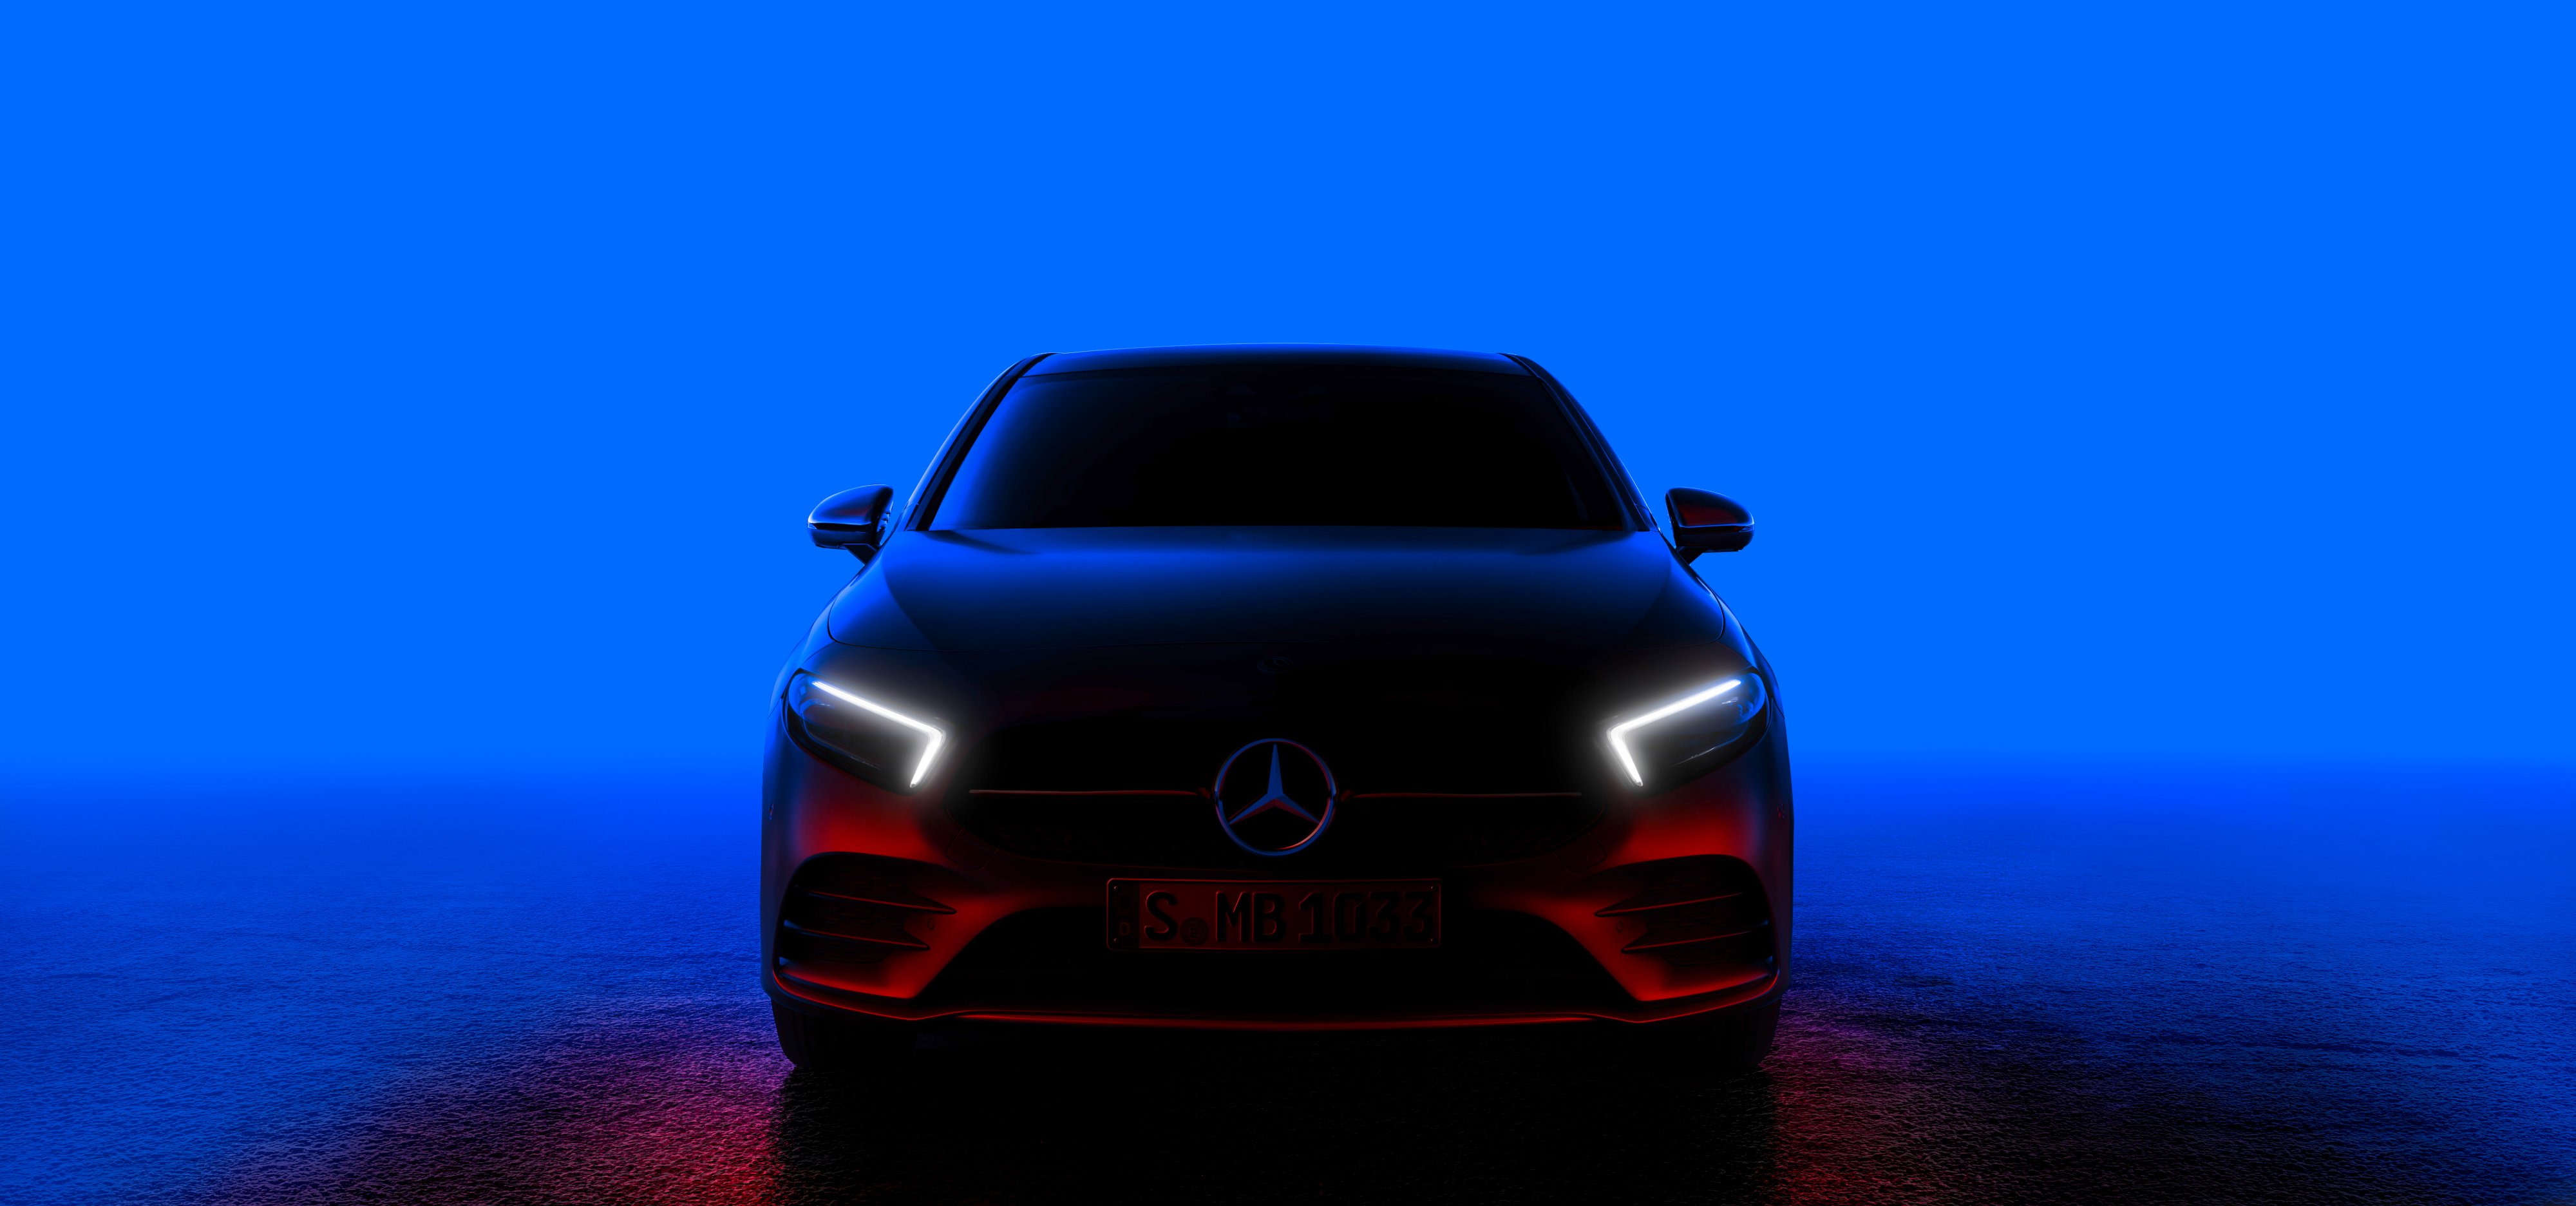 Witness the world premiere live online: Big debut for the new A-Class